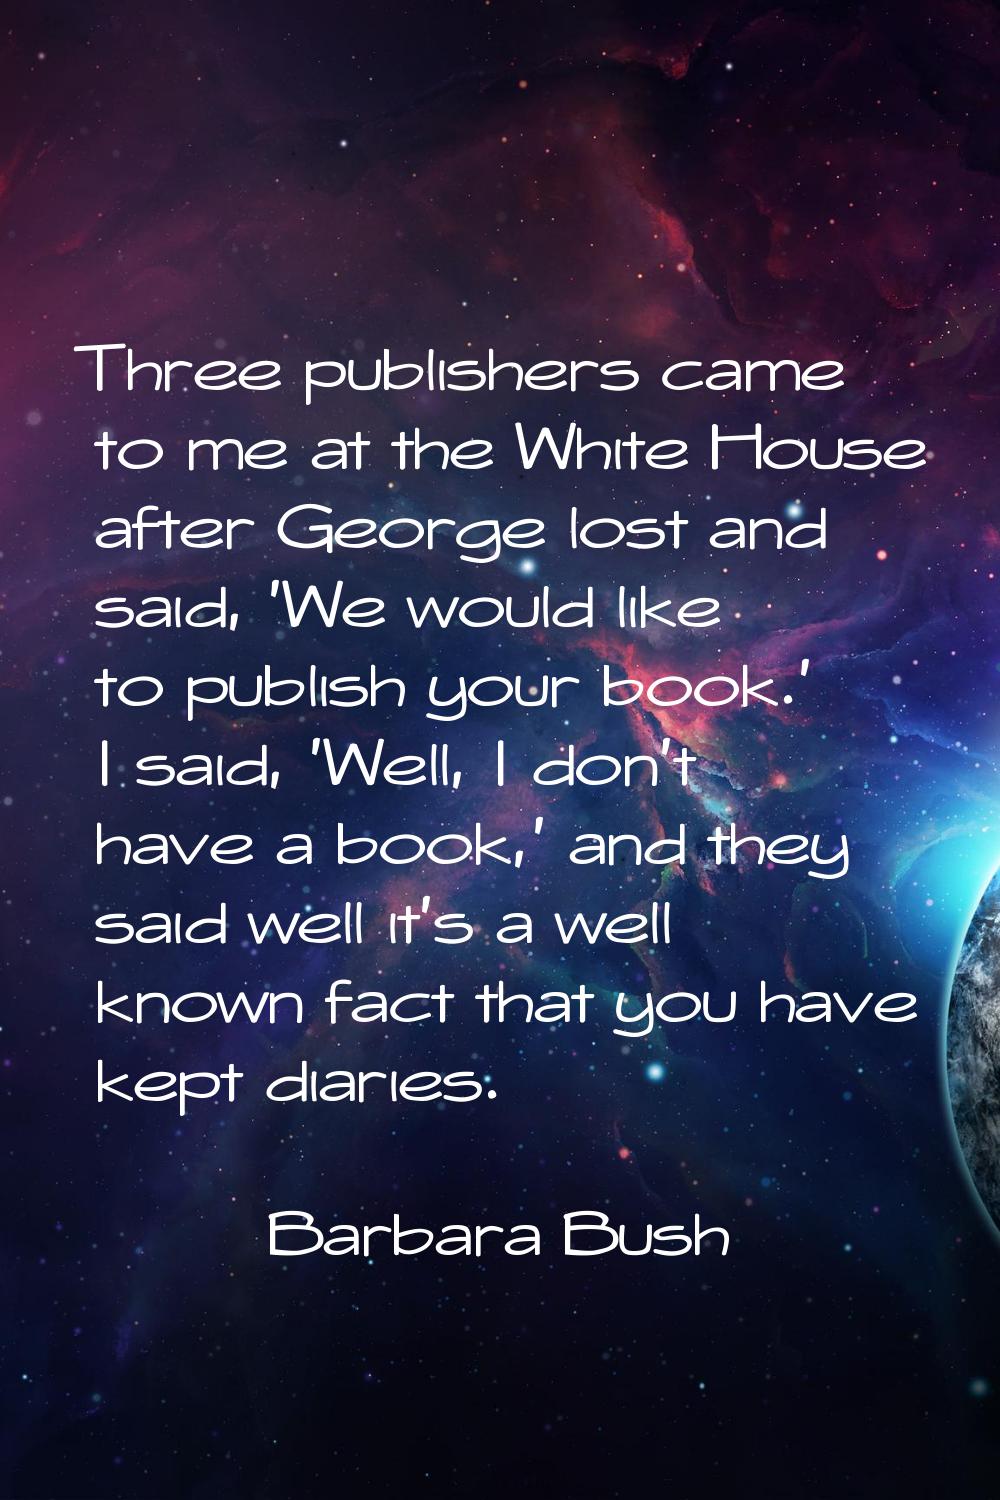 Three publishers came to me at the White House after George lost and said, 'We would like to publis